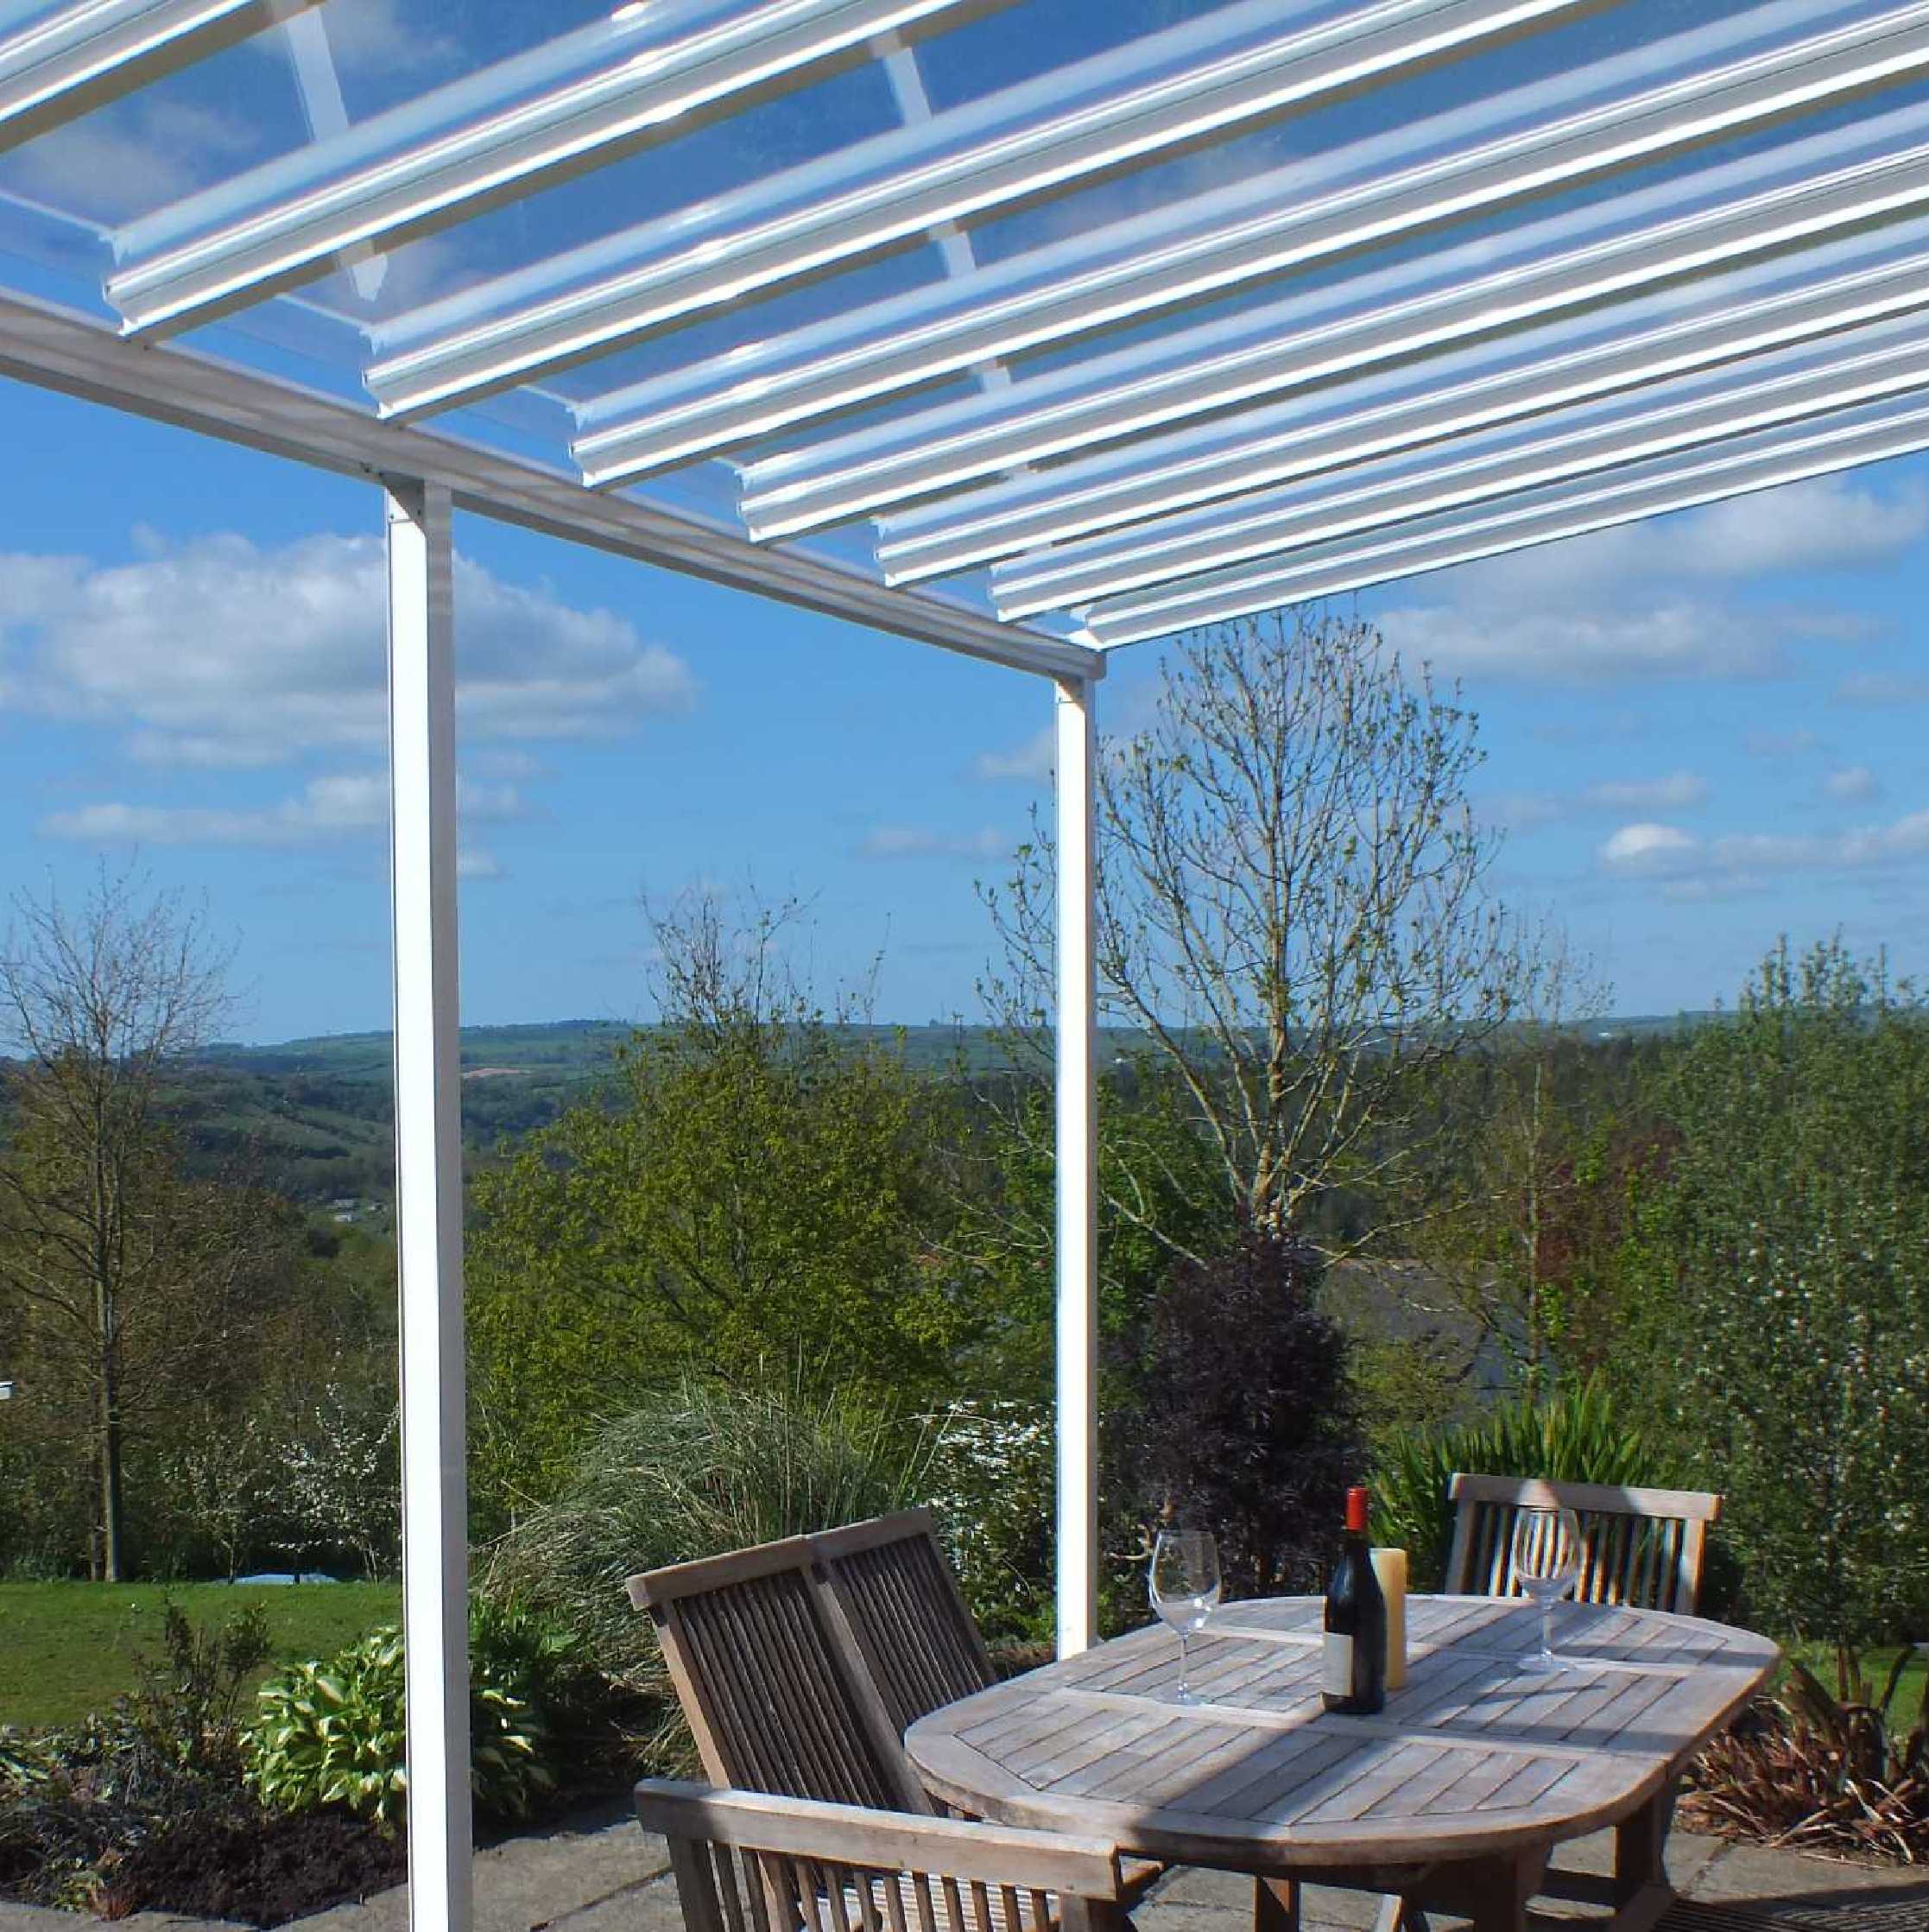 Buy Omega Smart Lean-To Canopy, White UNGLAZED for 6mm Glazing - 2.8m (W) x 2.5m (P), (2) Supporting Posts online today